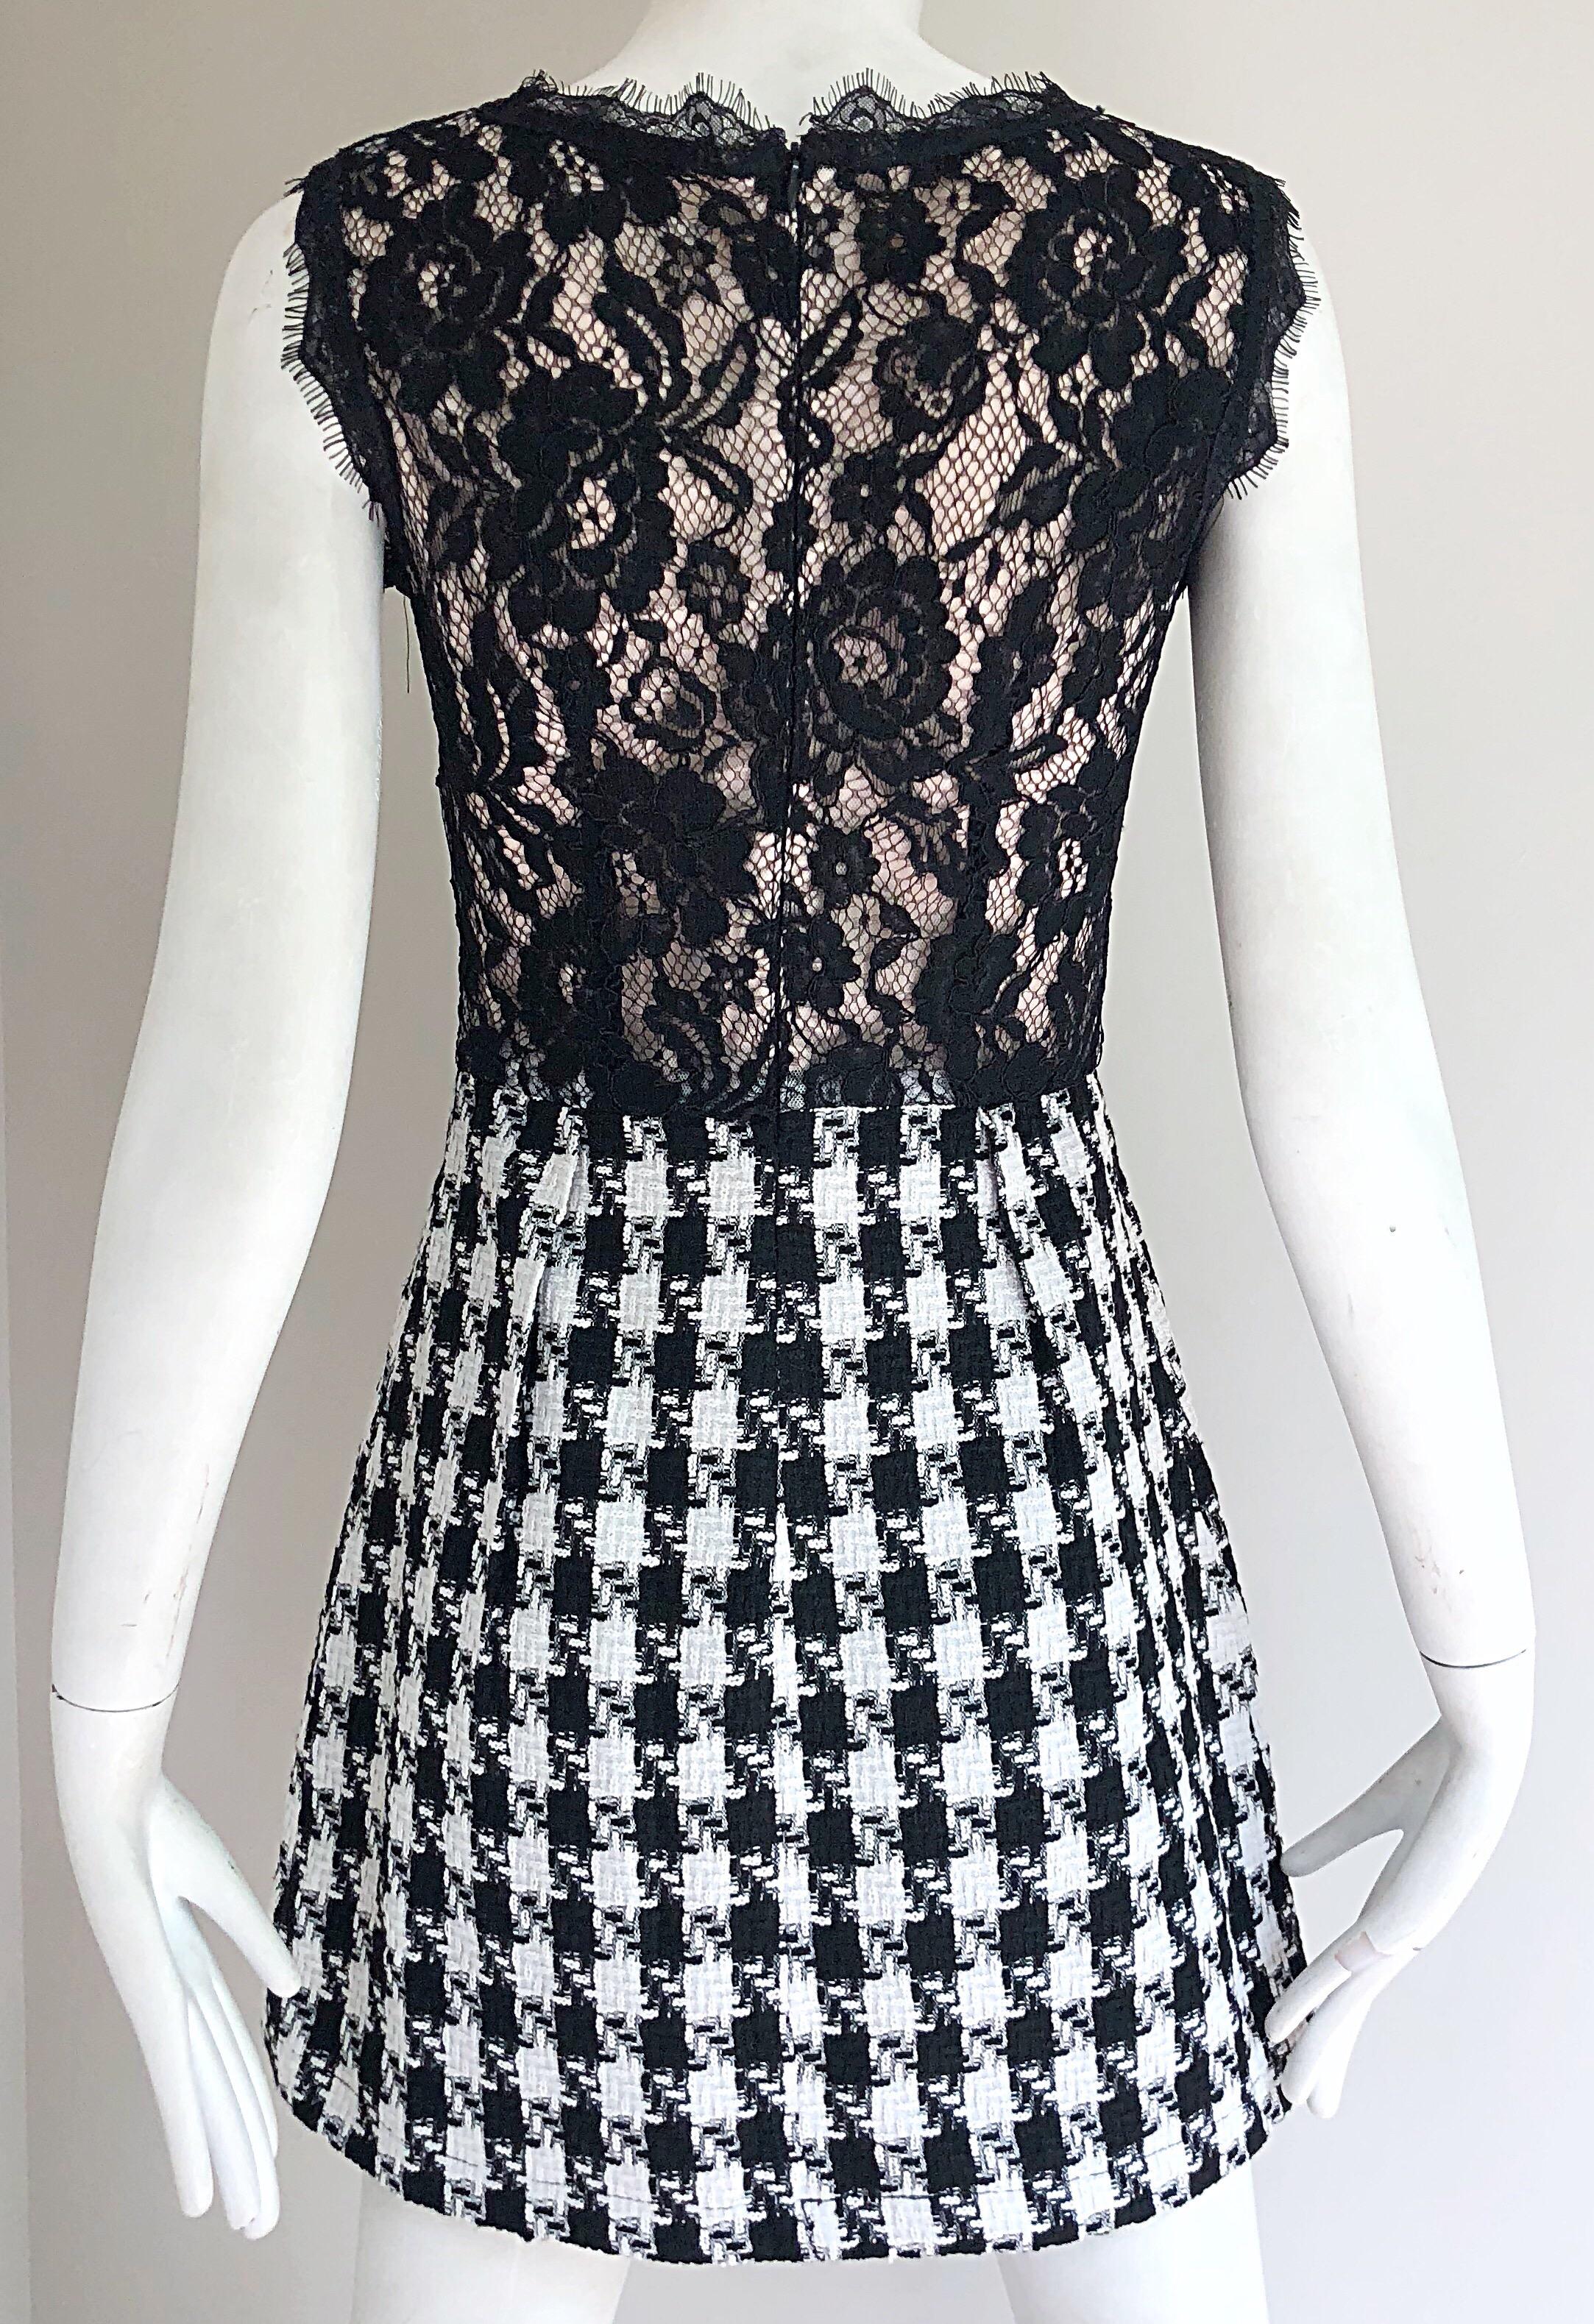 Marc Jacobs Early 2000s Black and White Lace Houndstooth Checkered Mini Dress For Sale 4